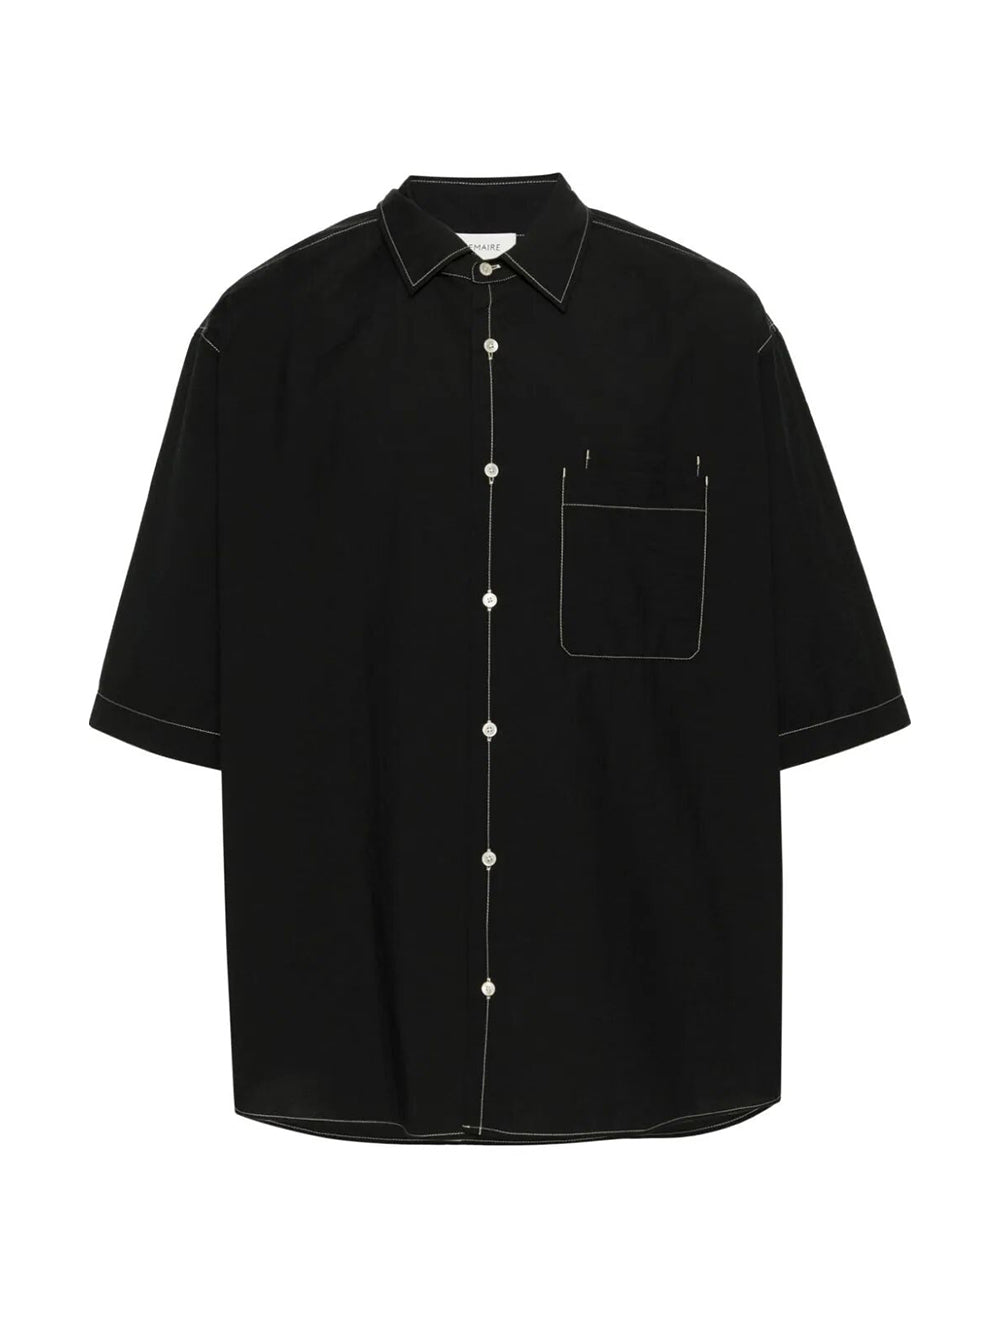 Voile short sleeved shirt with contrast stitch detail